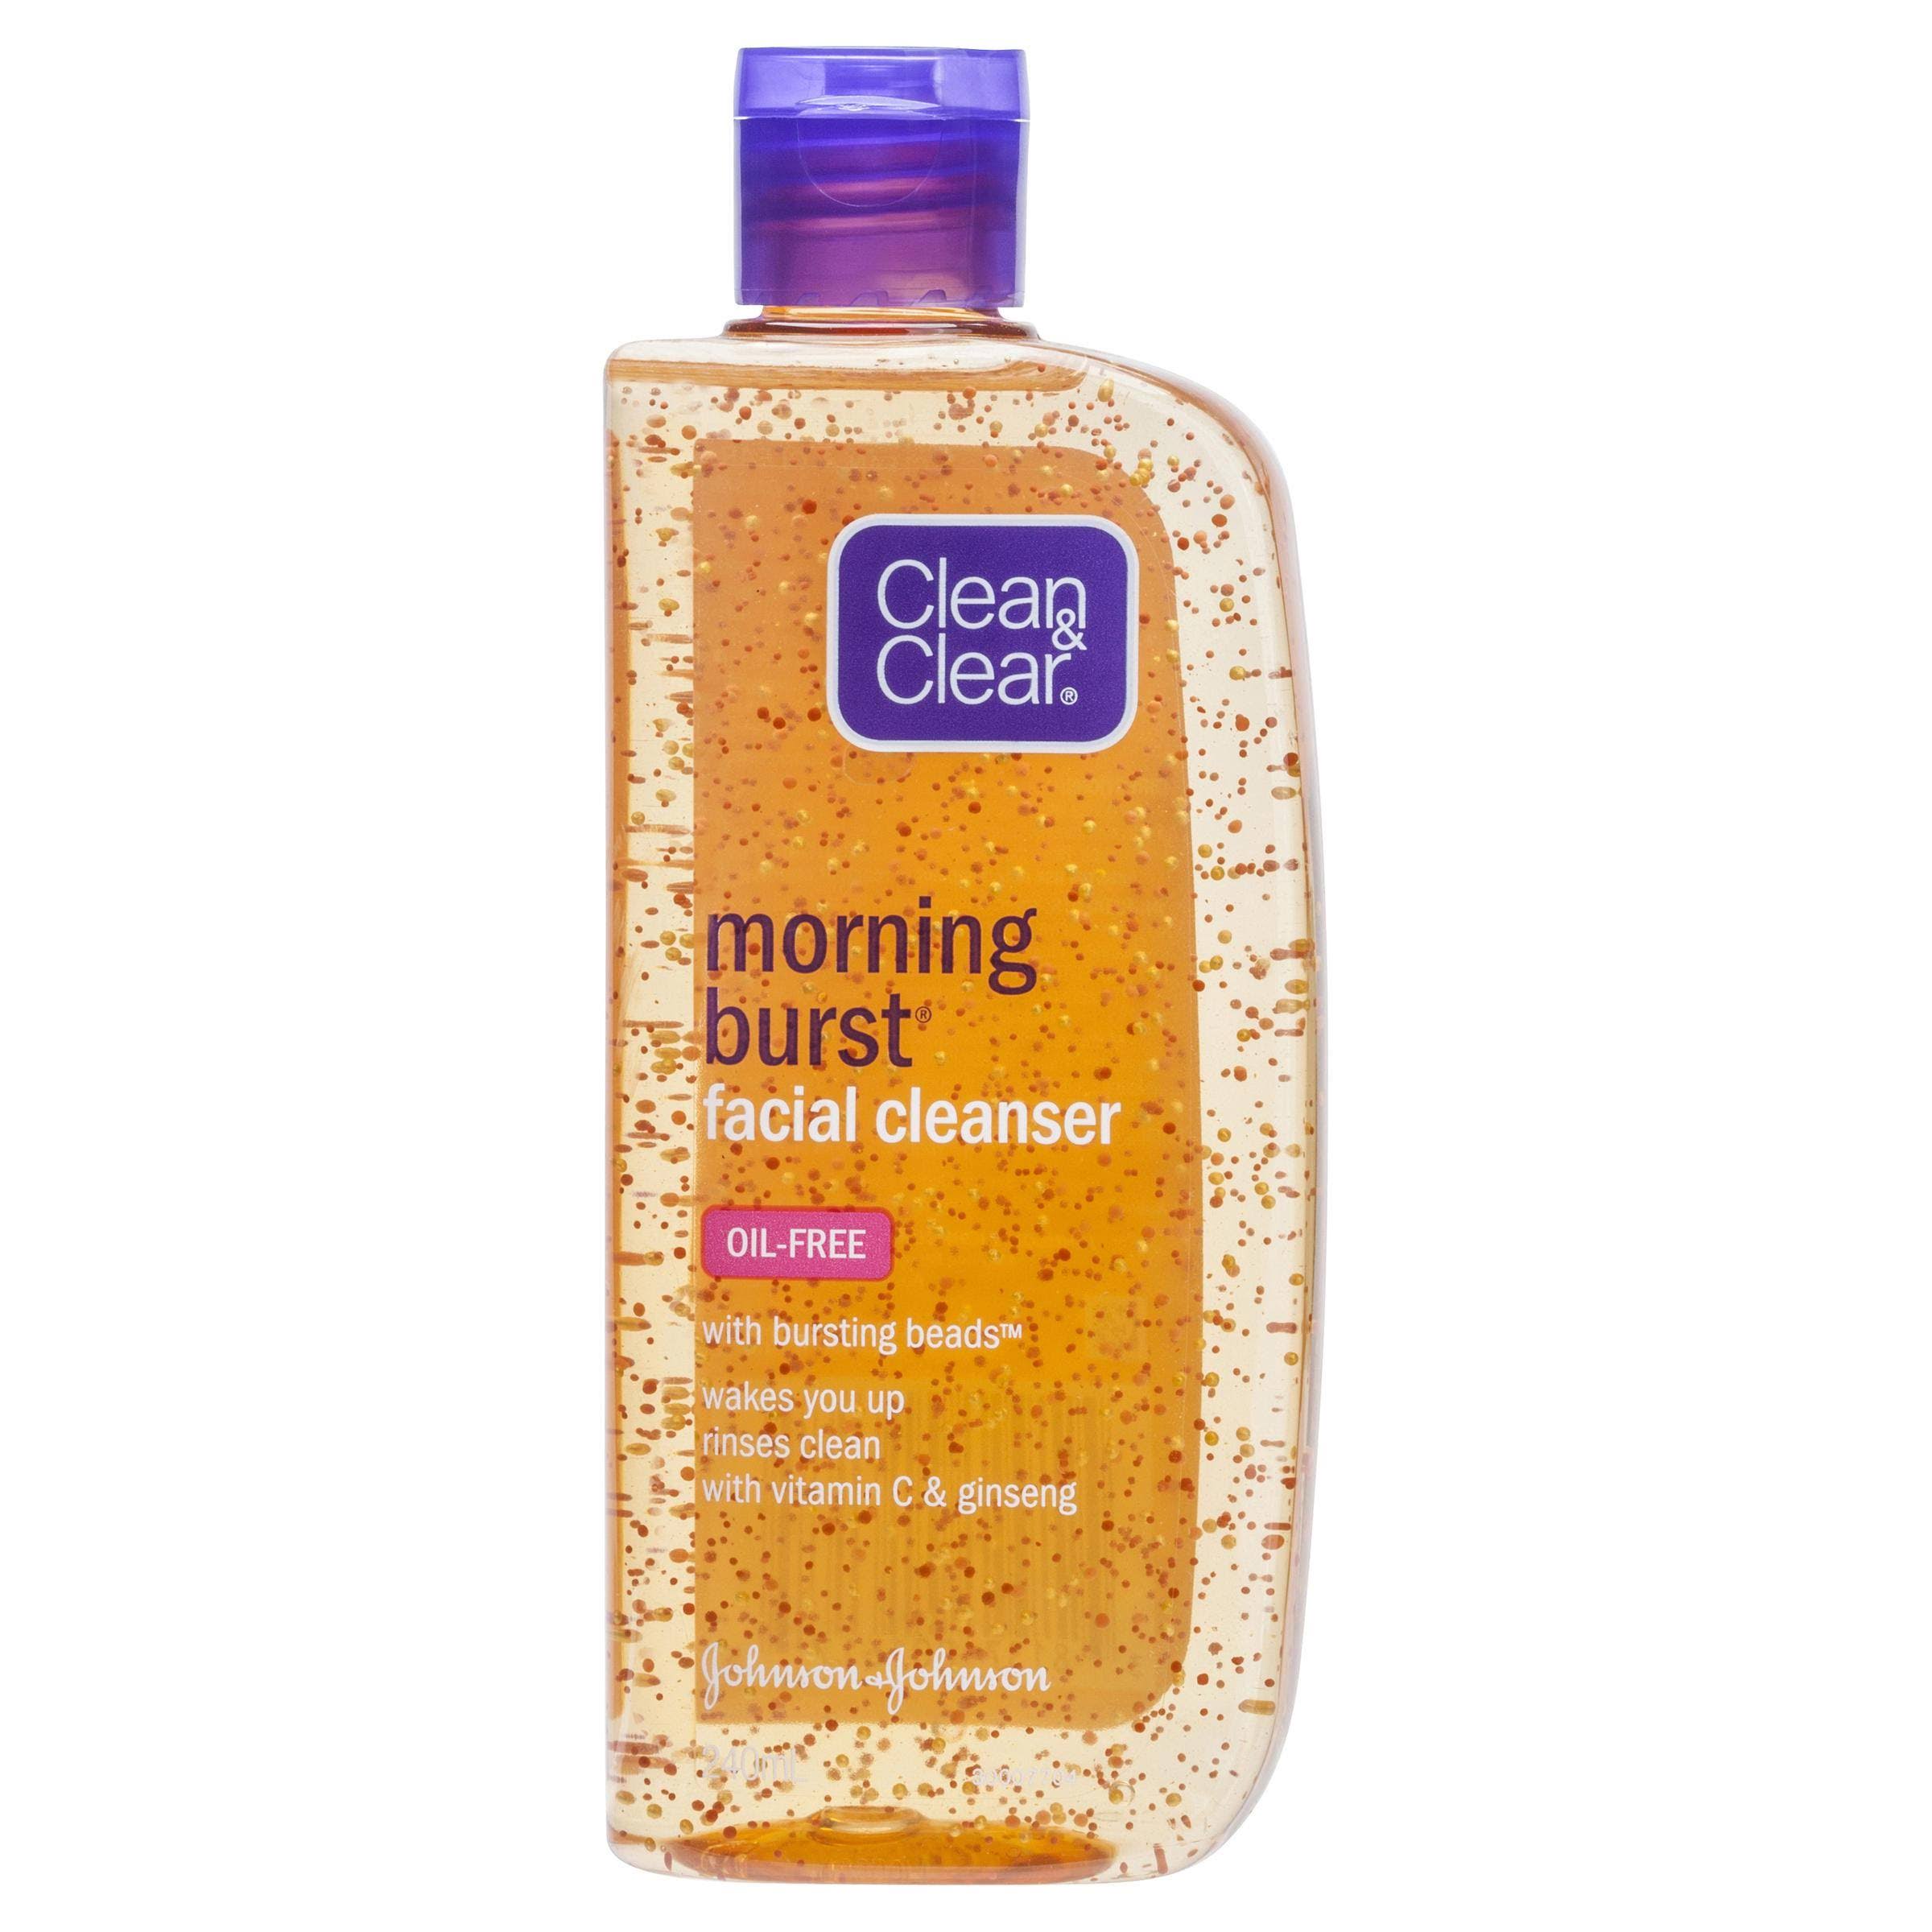 Clean and Clear Morning Burst Facial Cleanser - 8oz